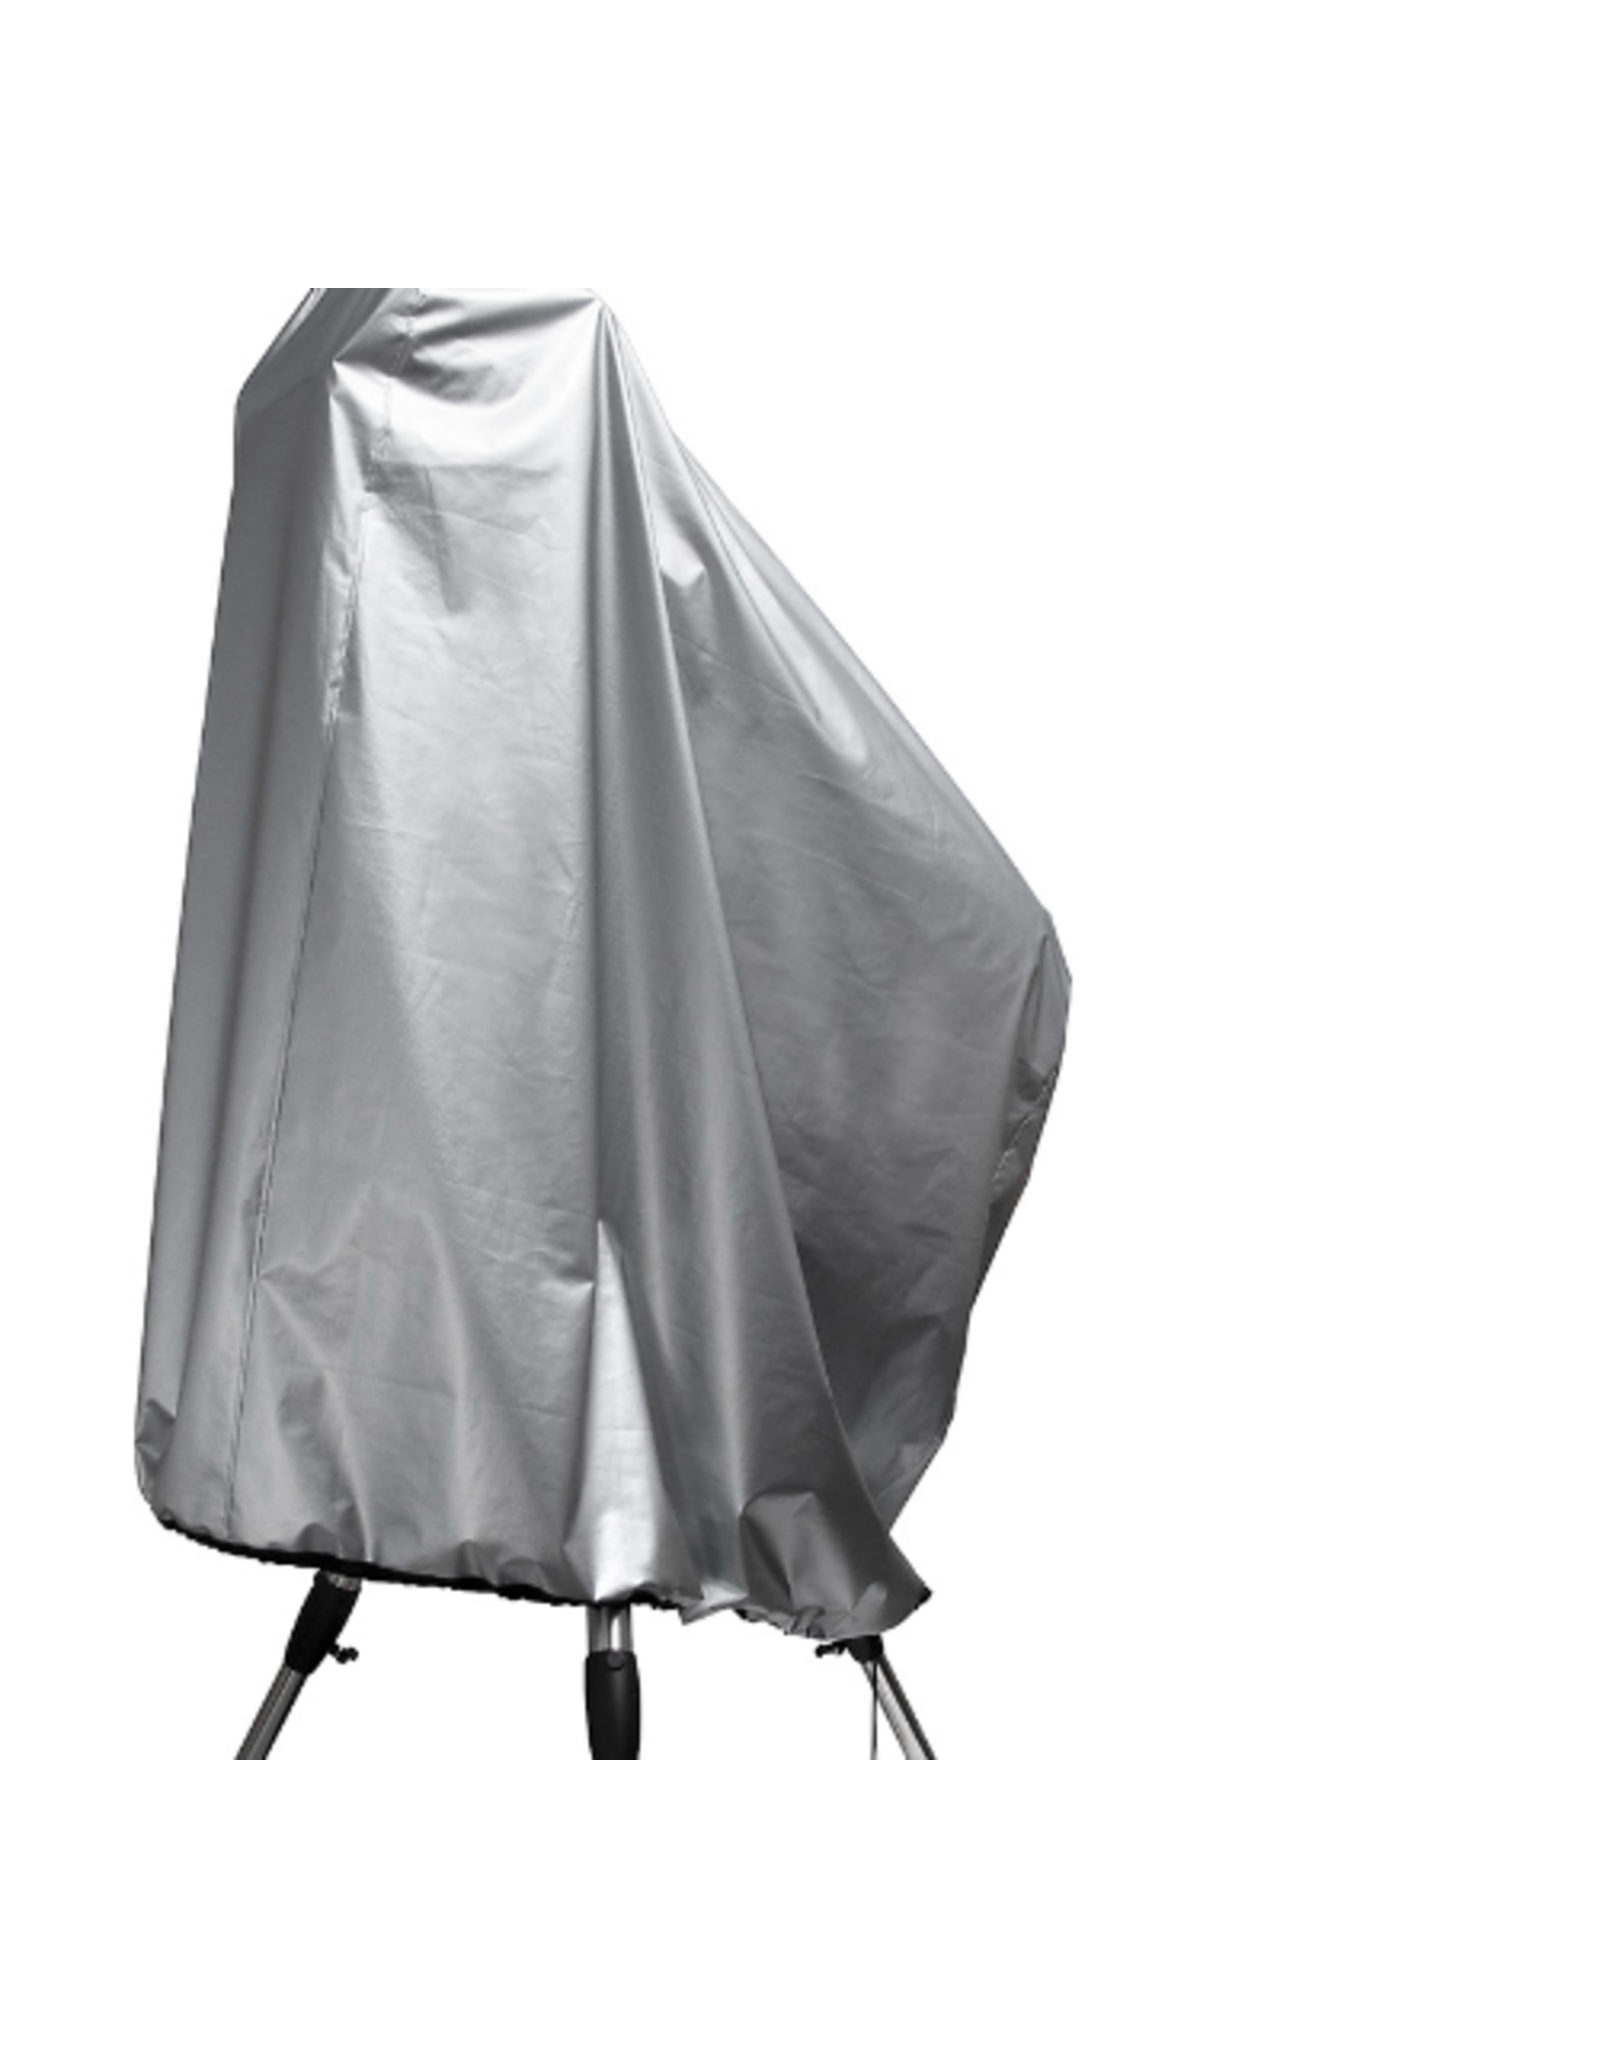 Orion Orion Cloak Cover for Large Mounted Telescopes - 15188 (DISPLAY)